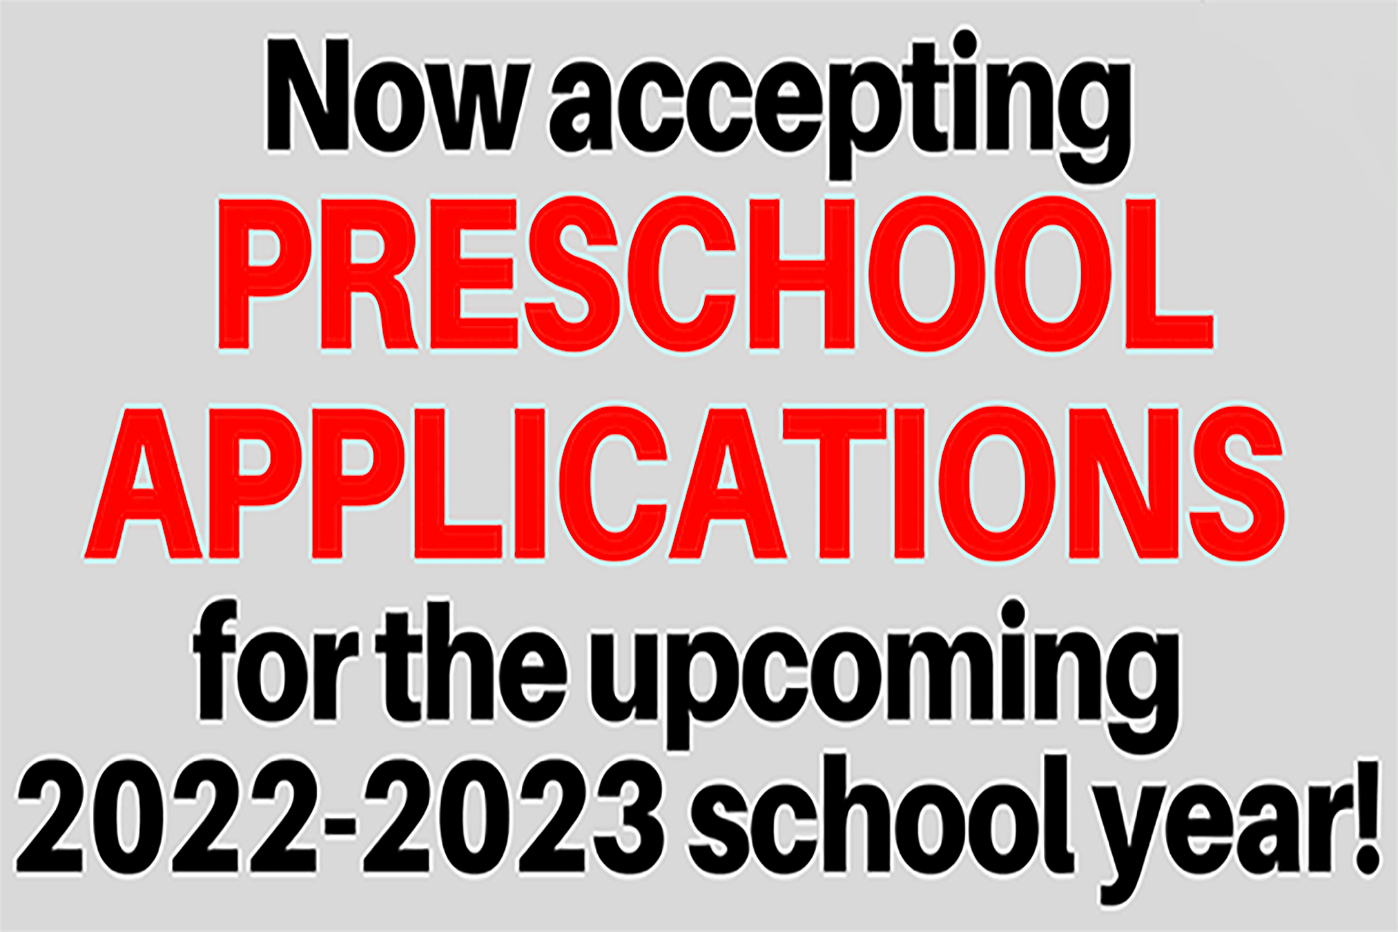 Now accepting preschool applications for the upcoming  school year